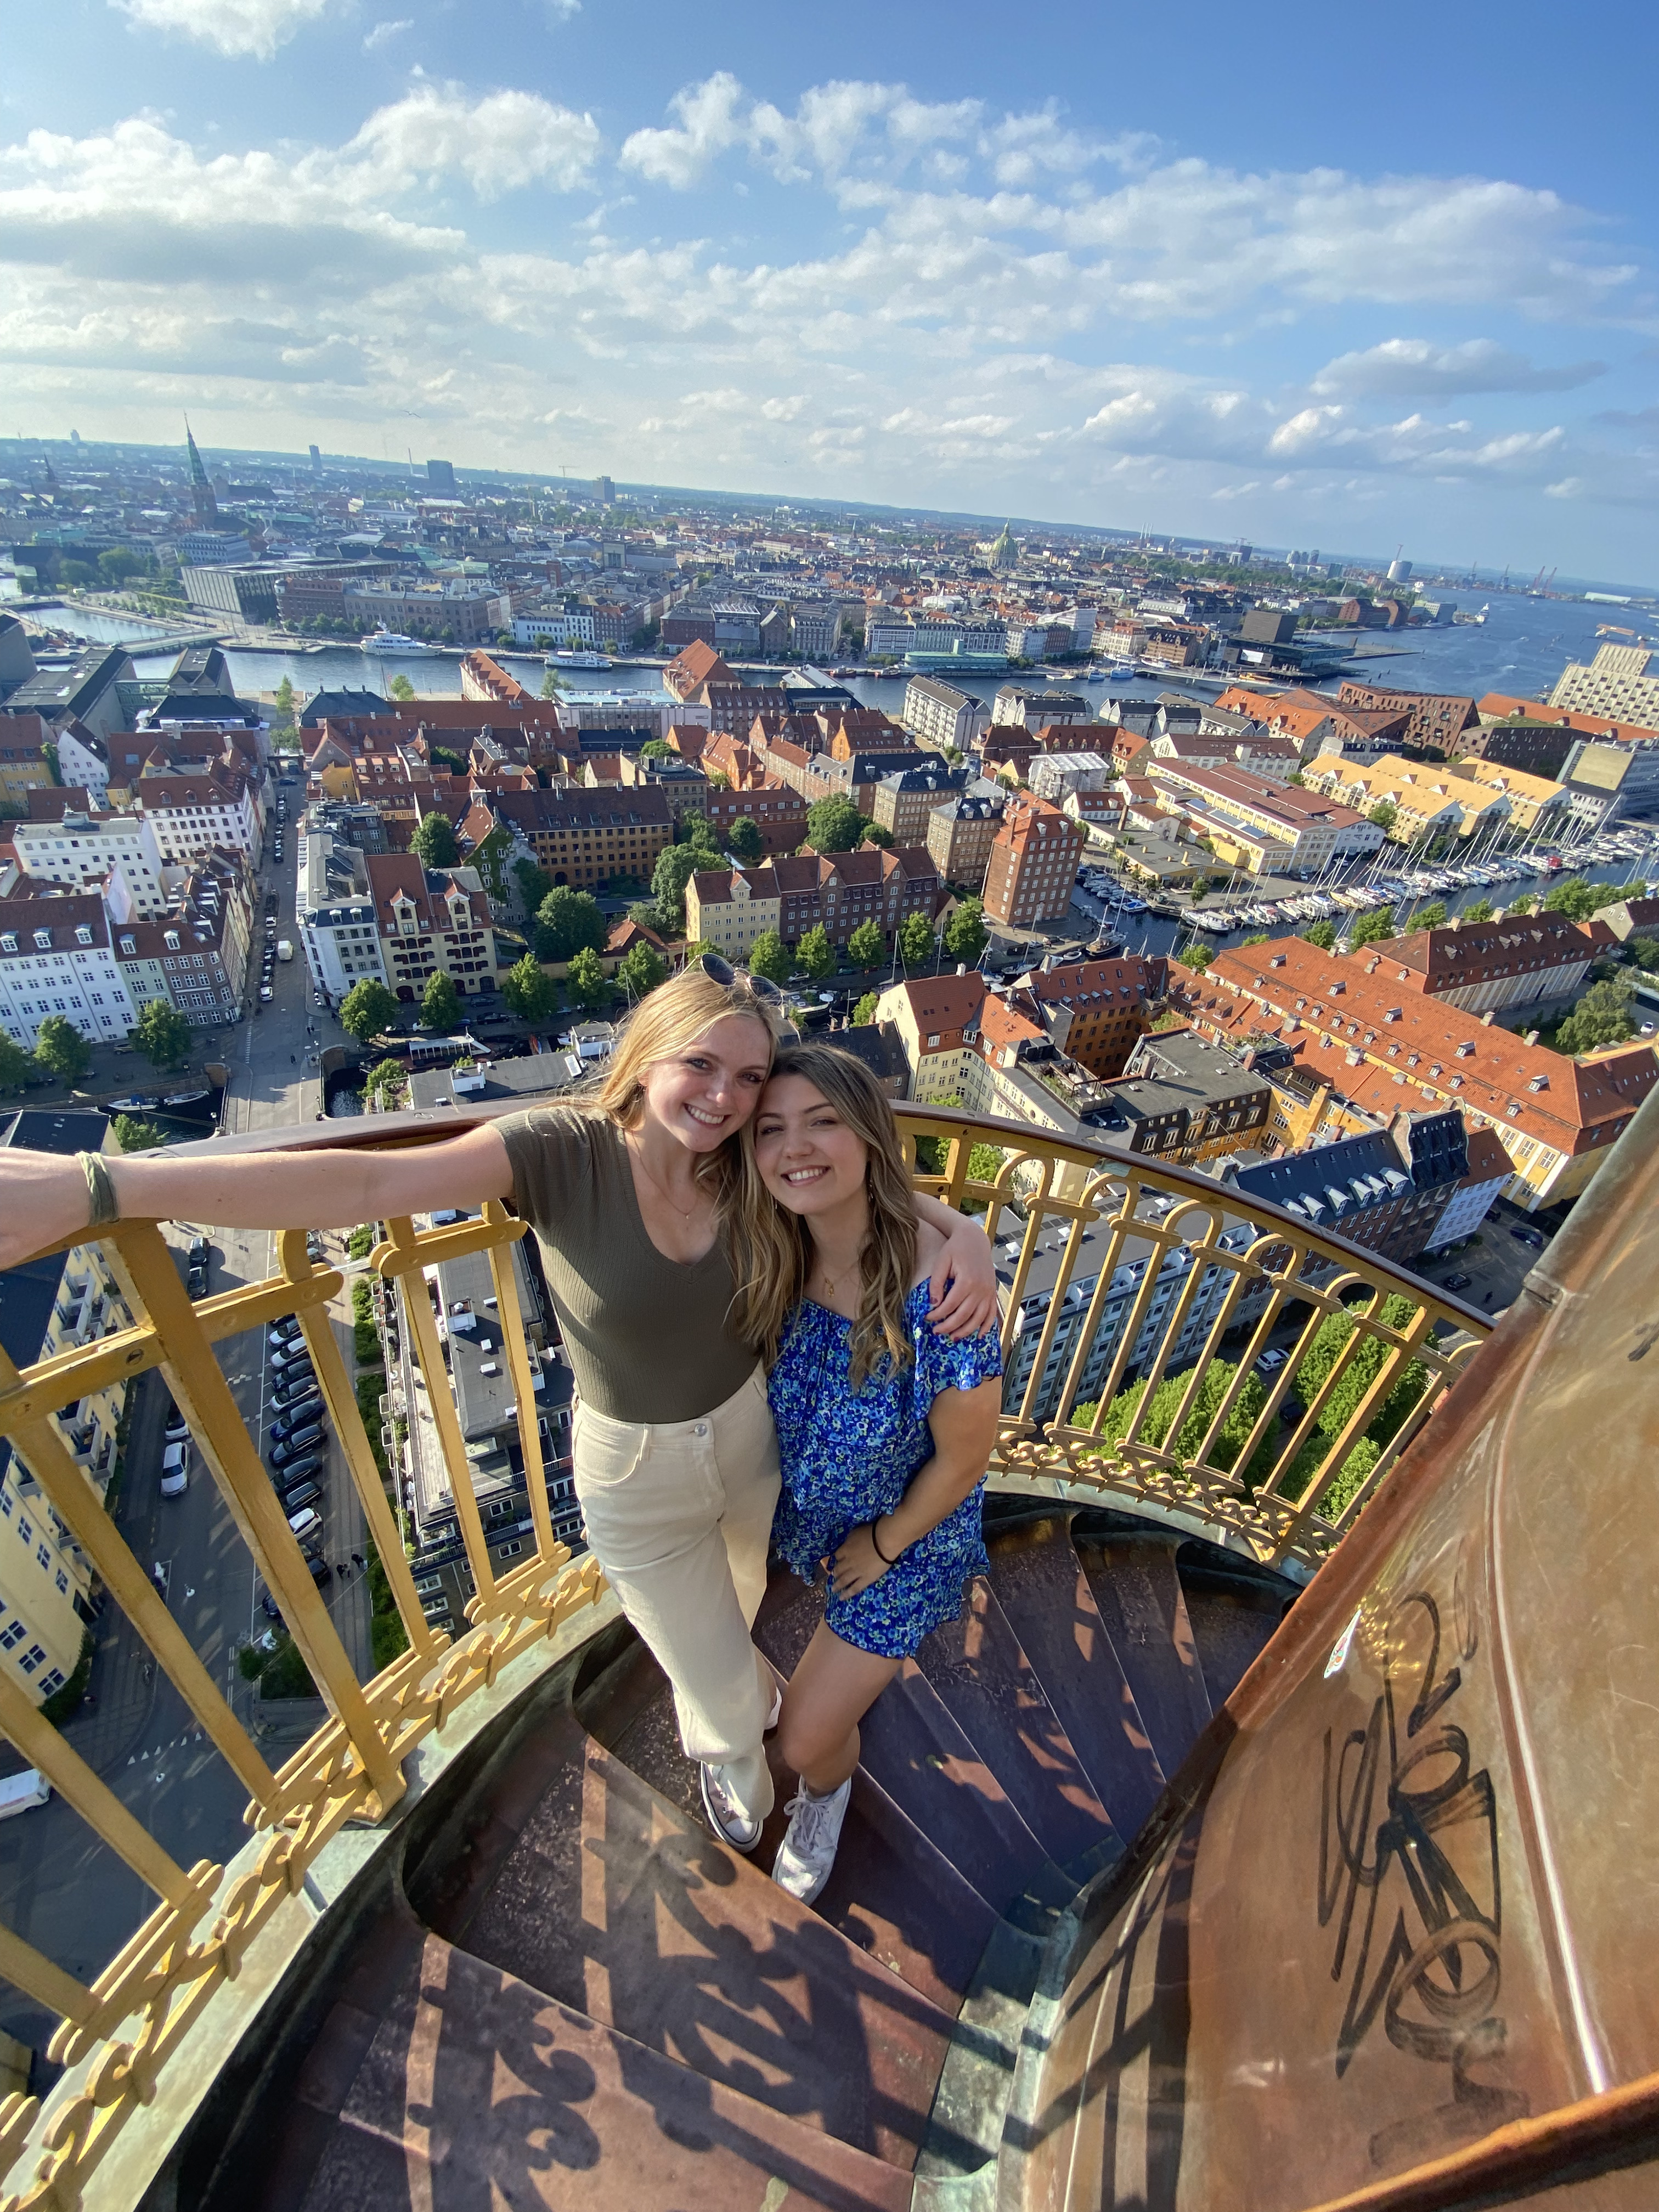 Students at the top of the Round Tower in Copenhagen, Denmark